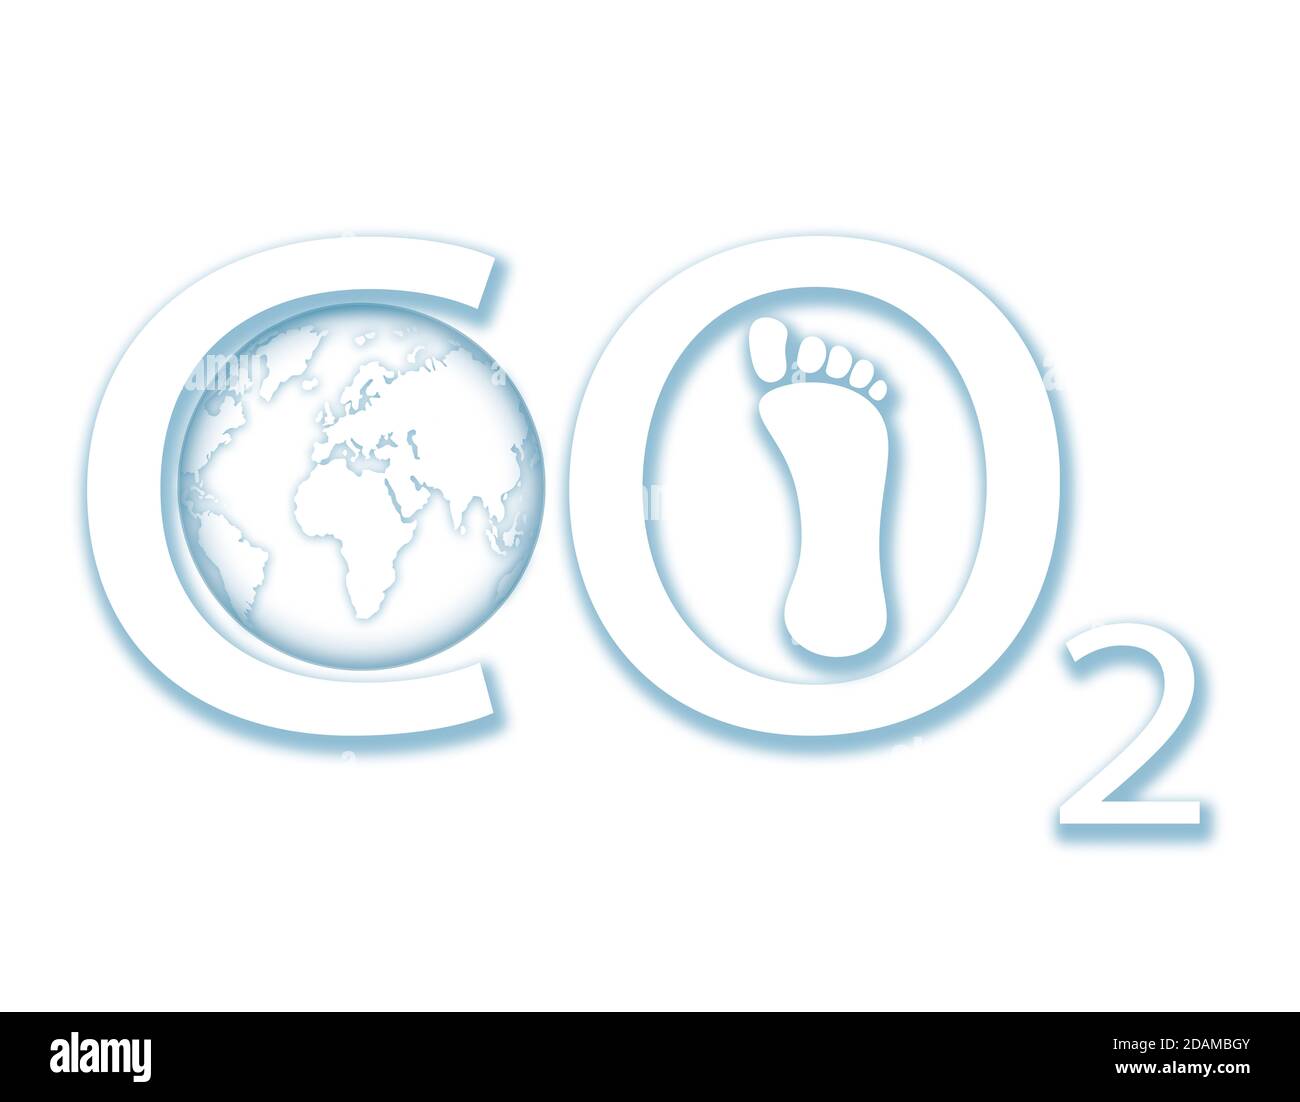 Carbon dioxide with Earth and footprint, illustration. Stock Photo